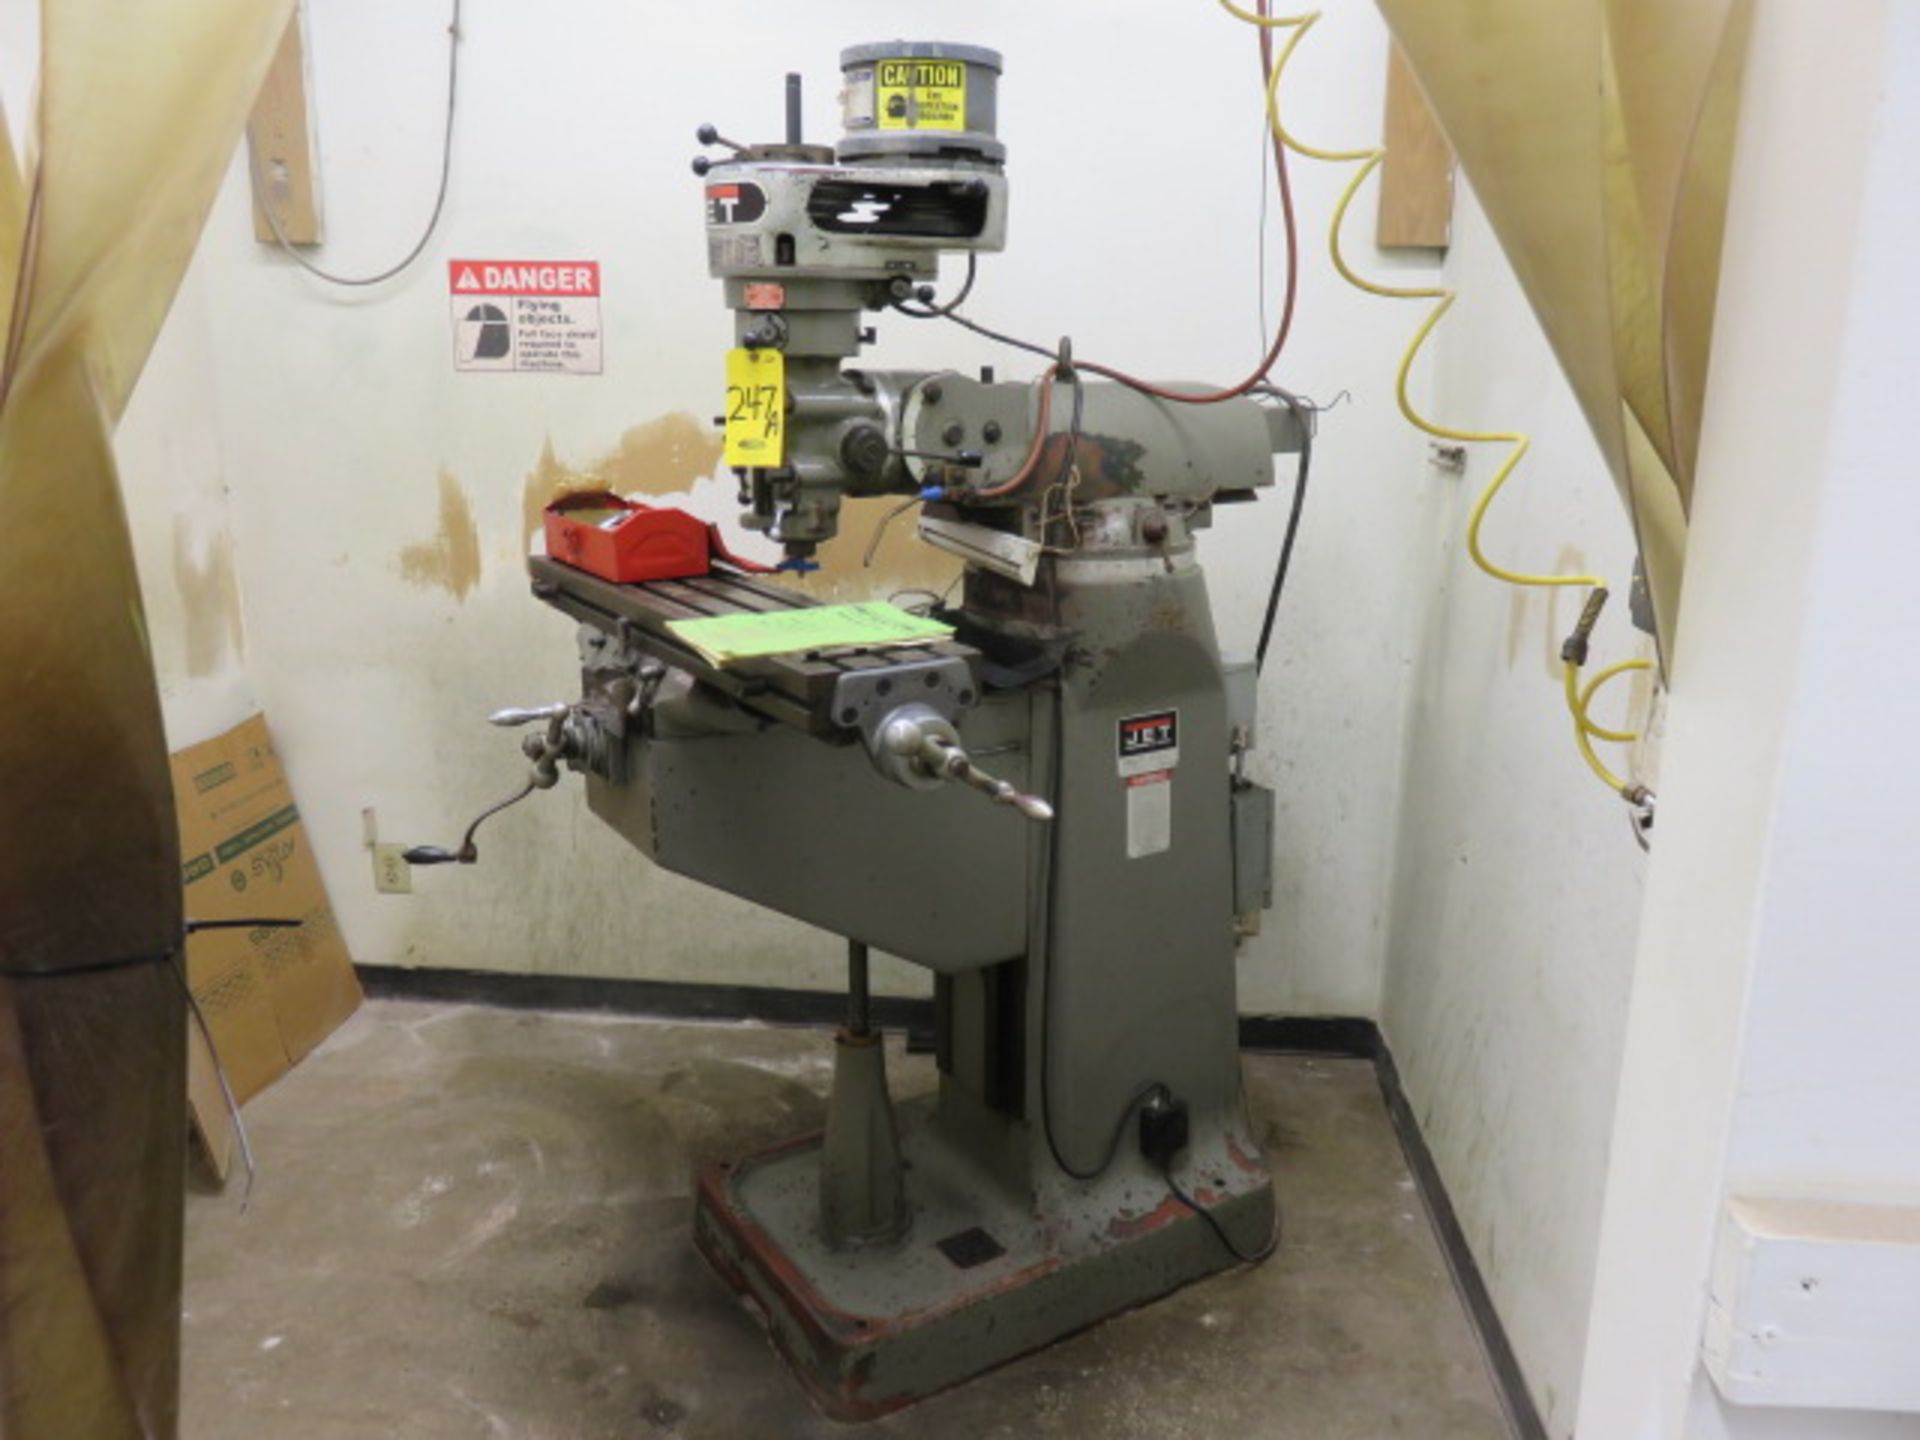 JET JTM-1 TURRET MILLING MACHINE, S/N 206 505711, NO. 690082, 9 IN. X 42 IN. TABLE, 2 HP